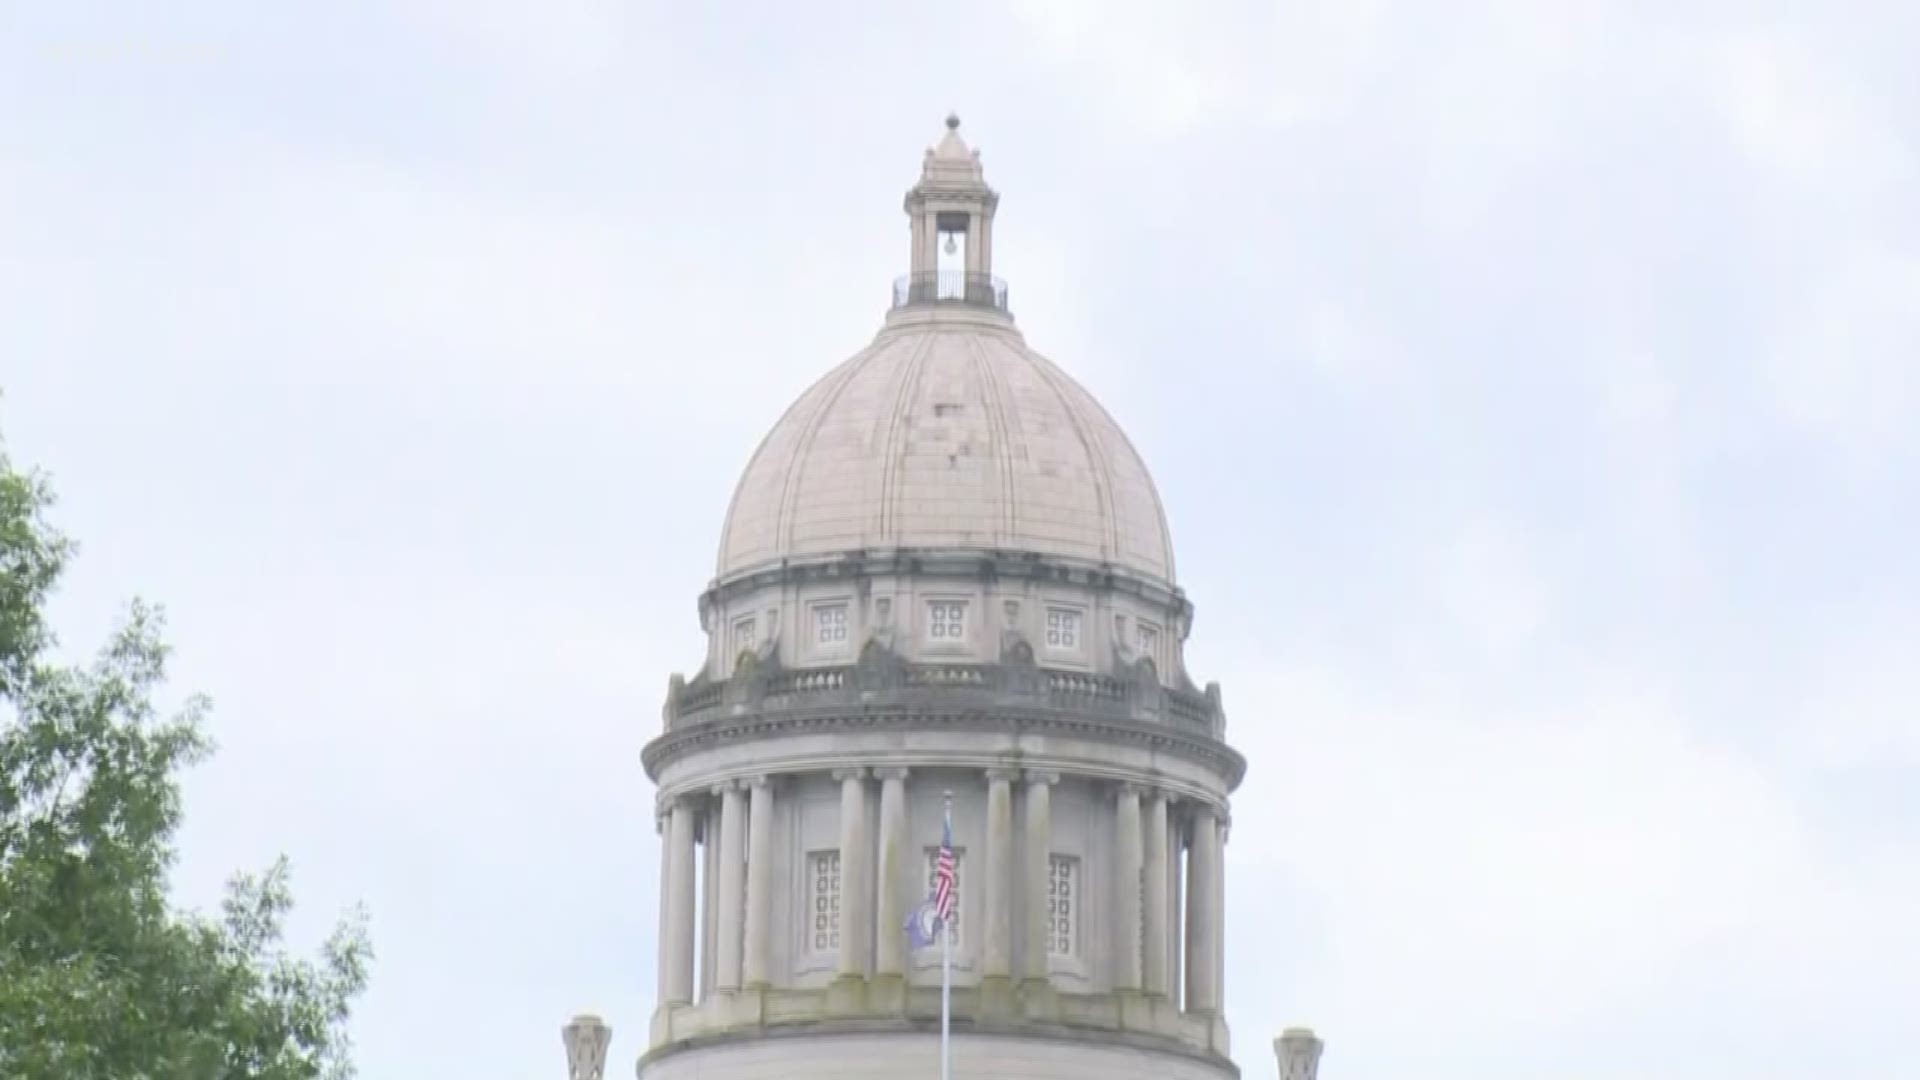 WHAS11 political editor Chris Williams says mixed signals are coming from Frankfort as regional universities and rape crisis centers await a looming deadline.